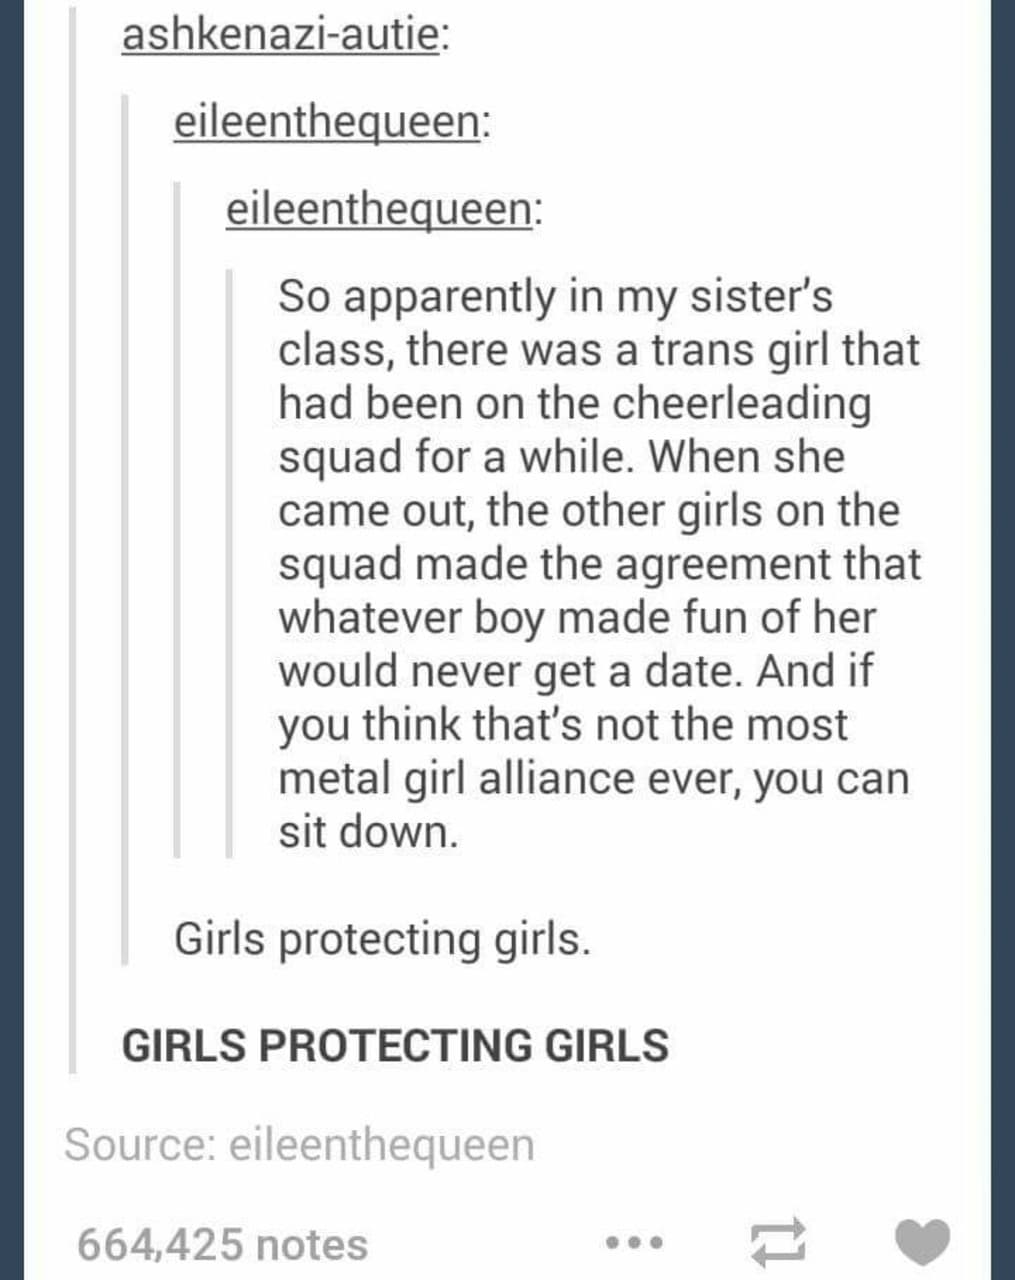 Women, TERF feminine memes Women, TERF text: ashkenazi-autie: eileenthequeen: eileenthequeen: So apparently in my sister's class, there was a trans girl that had been on the cheerleading squad for a while. When she came out, the other girls on the squad made the agreement that whatever boy made fun of her would never get a date. And if you think that's not the most metal girl alliance ever, you can sit down. Girls protecting girls. GIRLS PROTECTING GIRLS Source: eileenthequeen 664,425 notes 